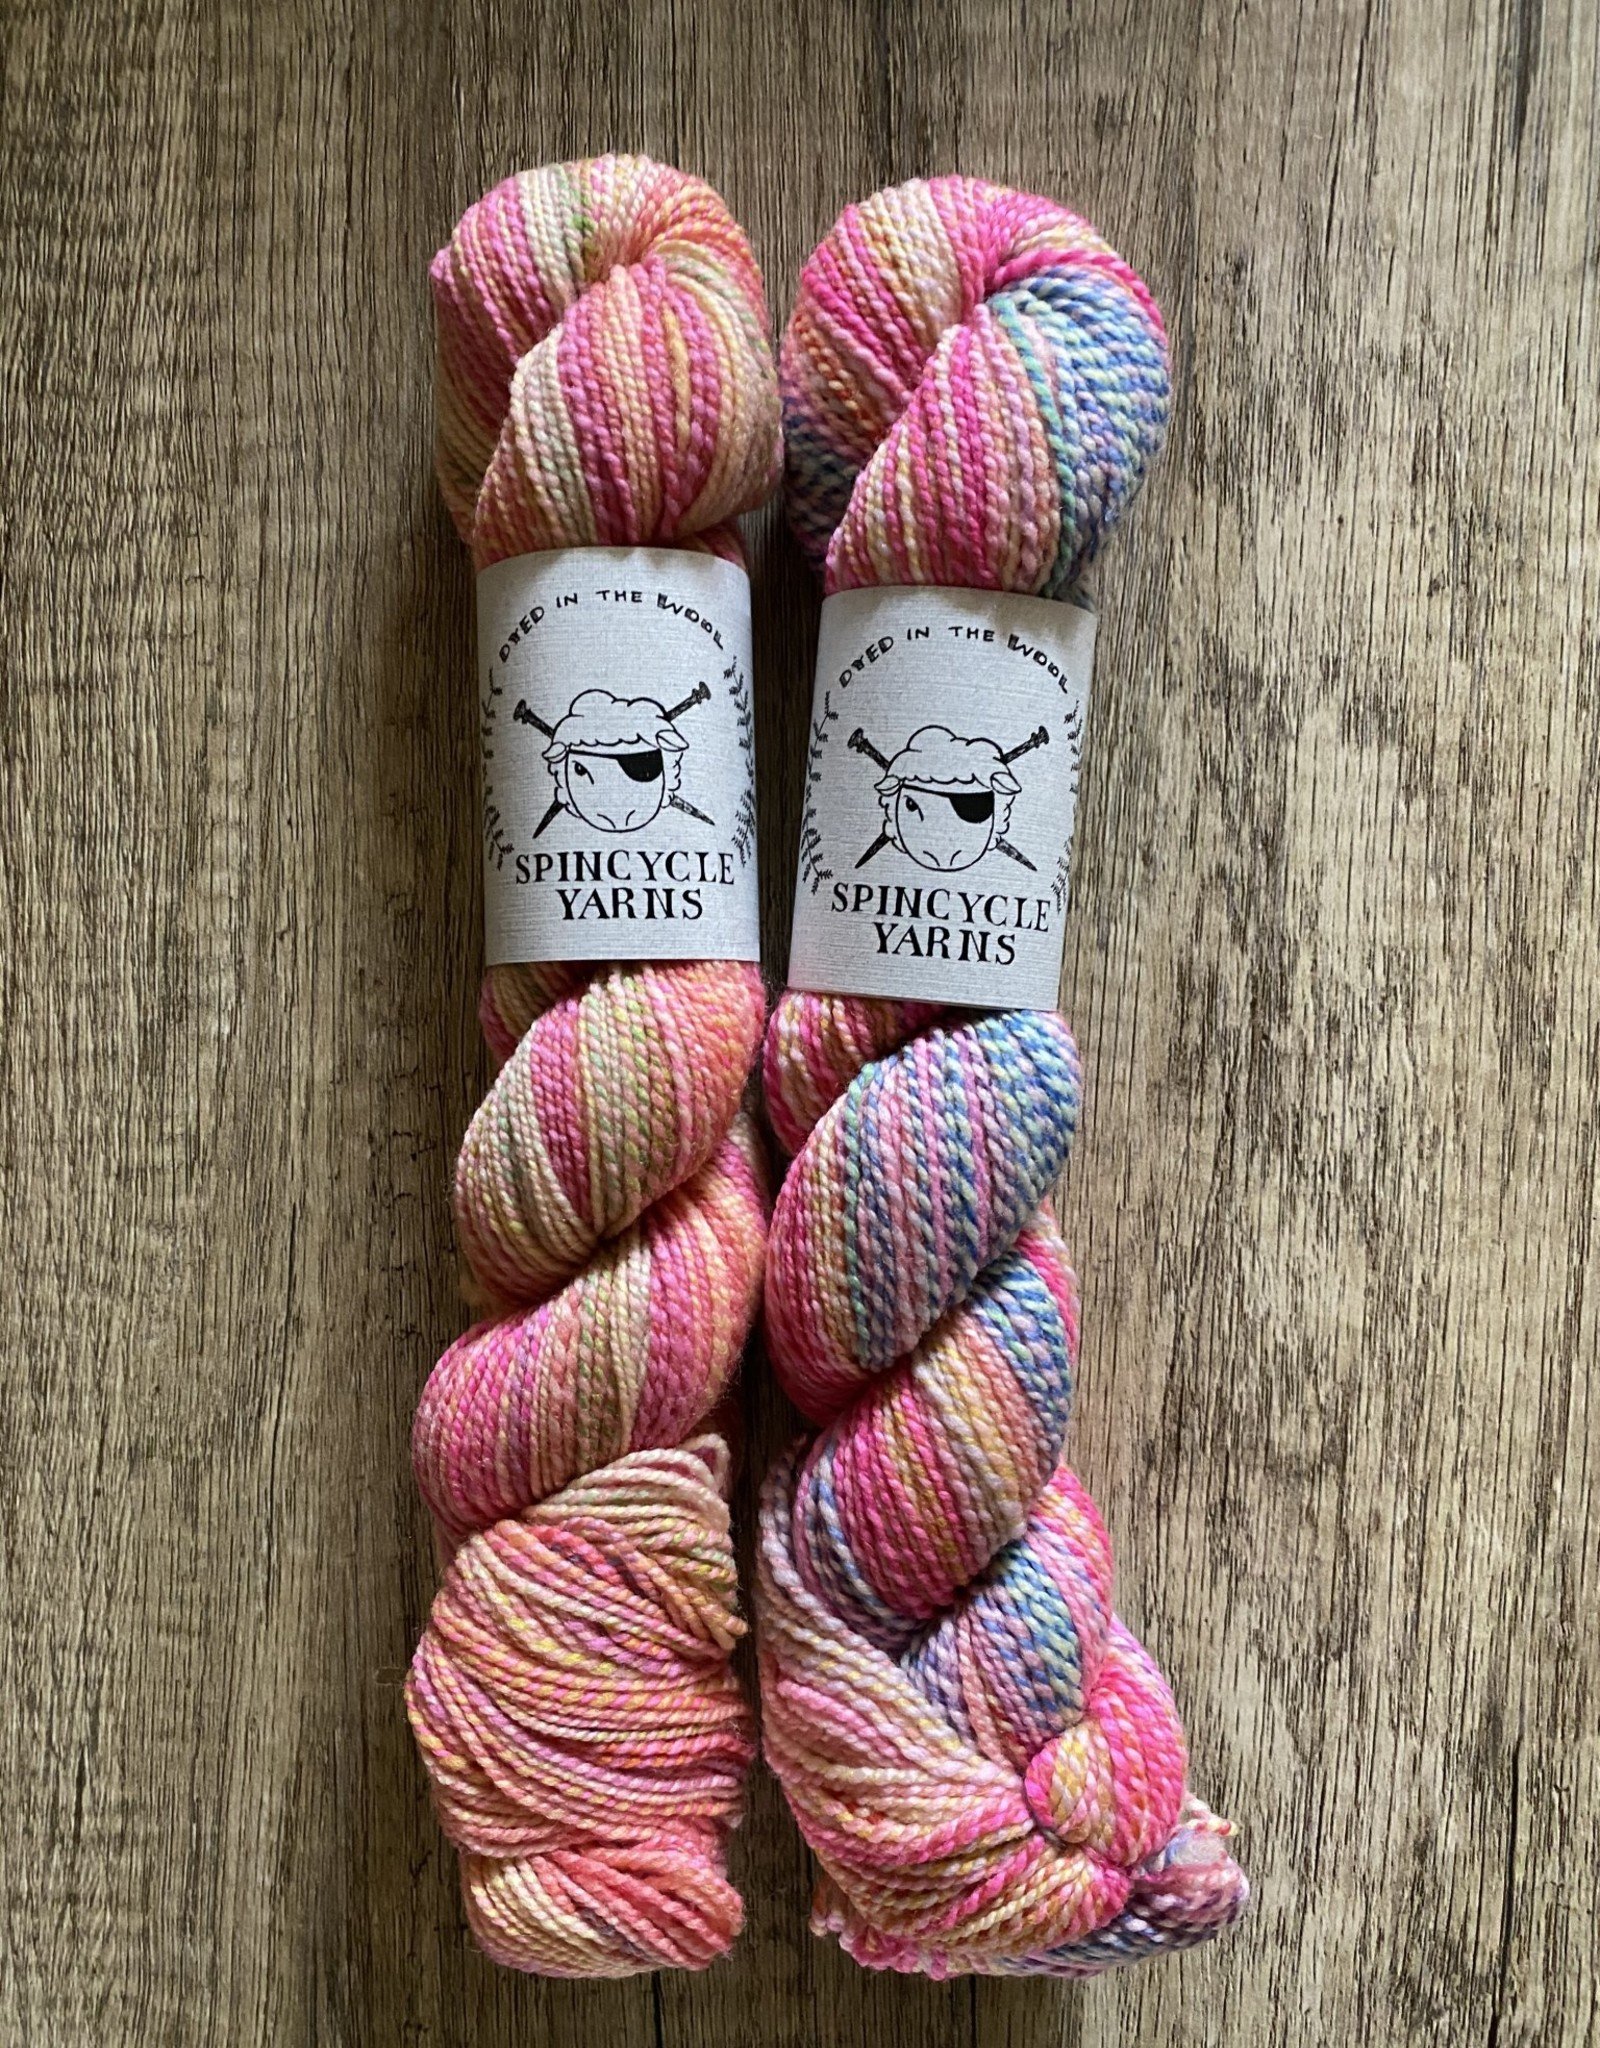 Spincycle Yarns Dyed in the Wool Midsommer